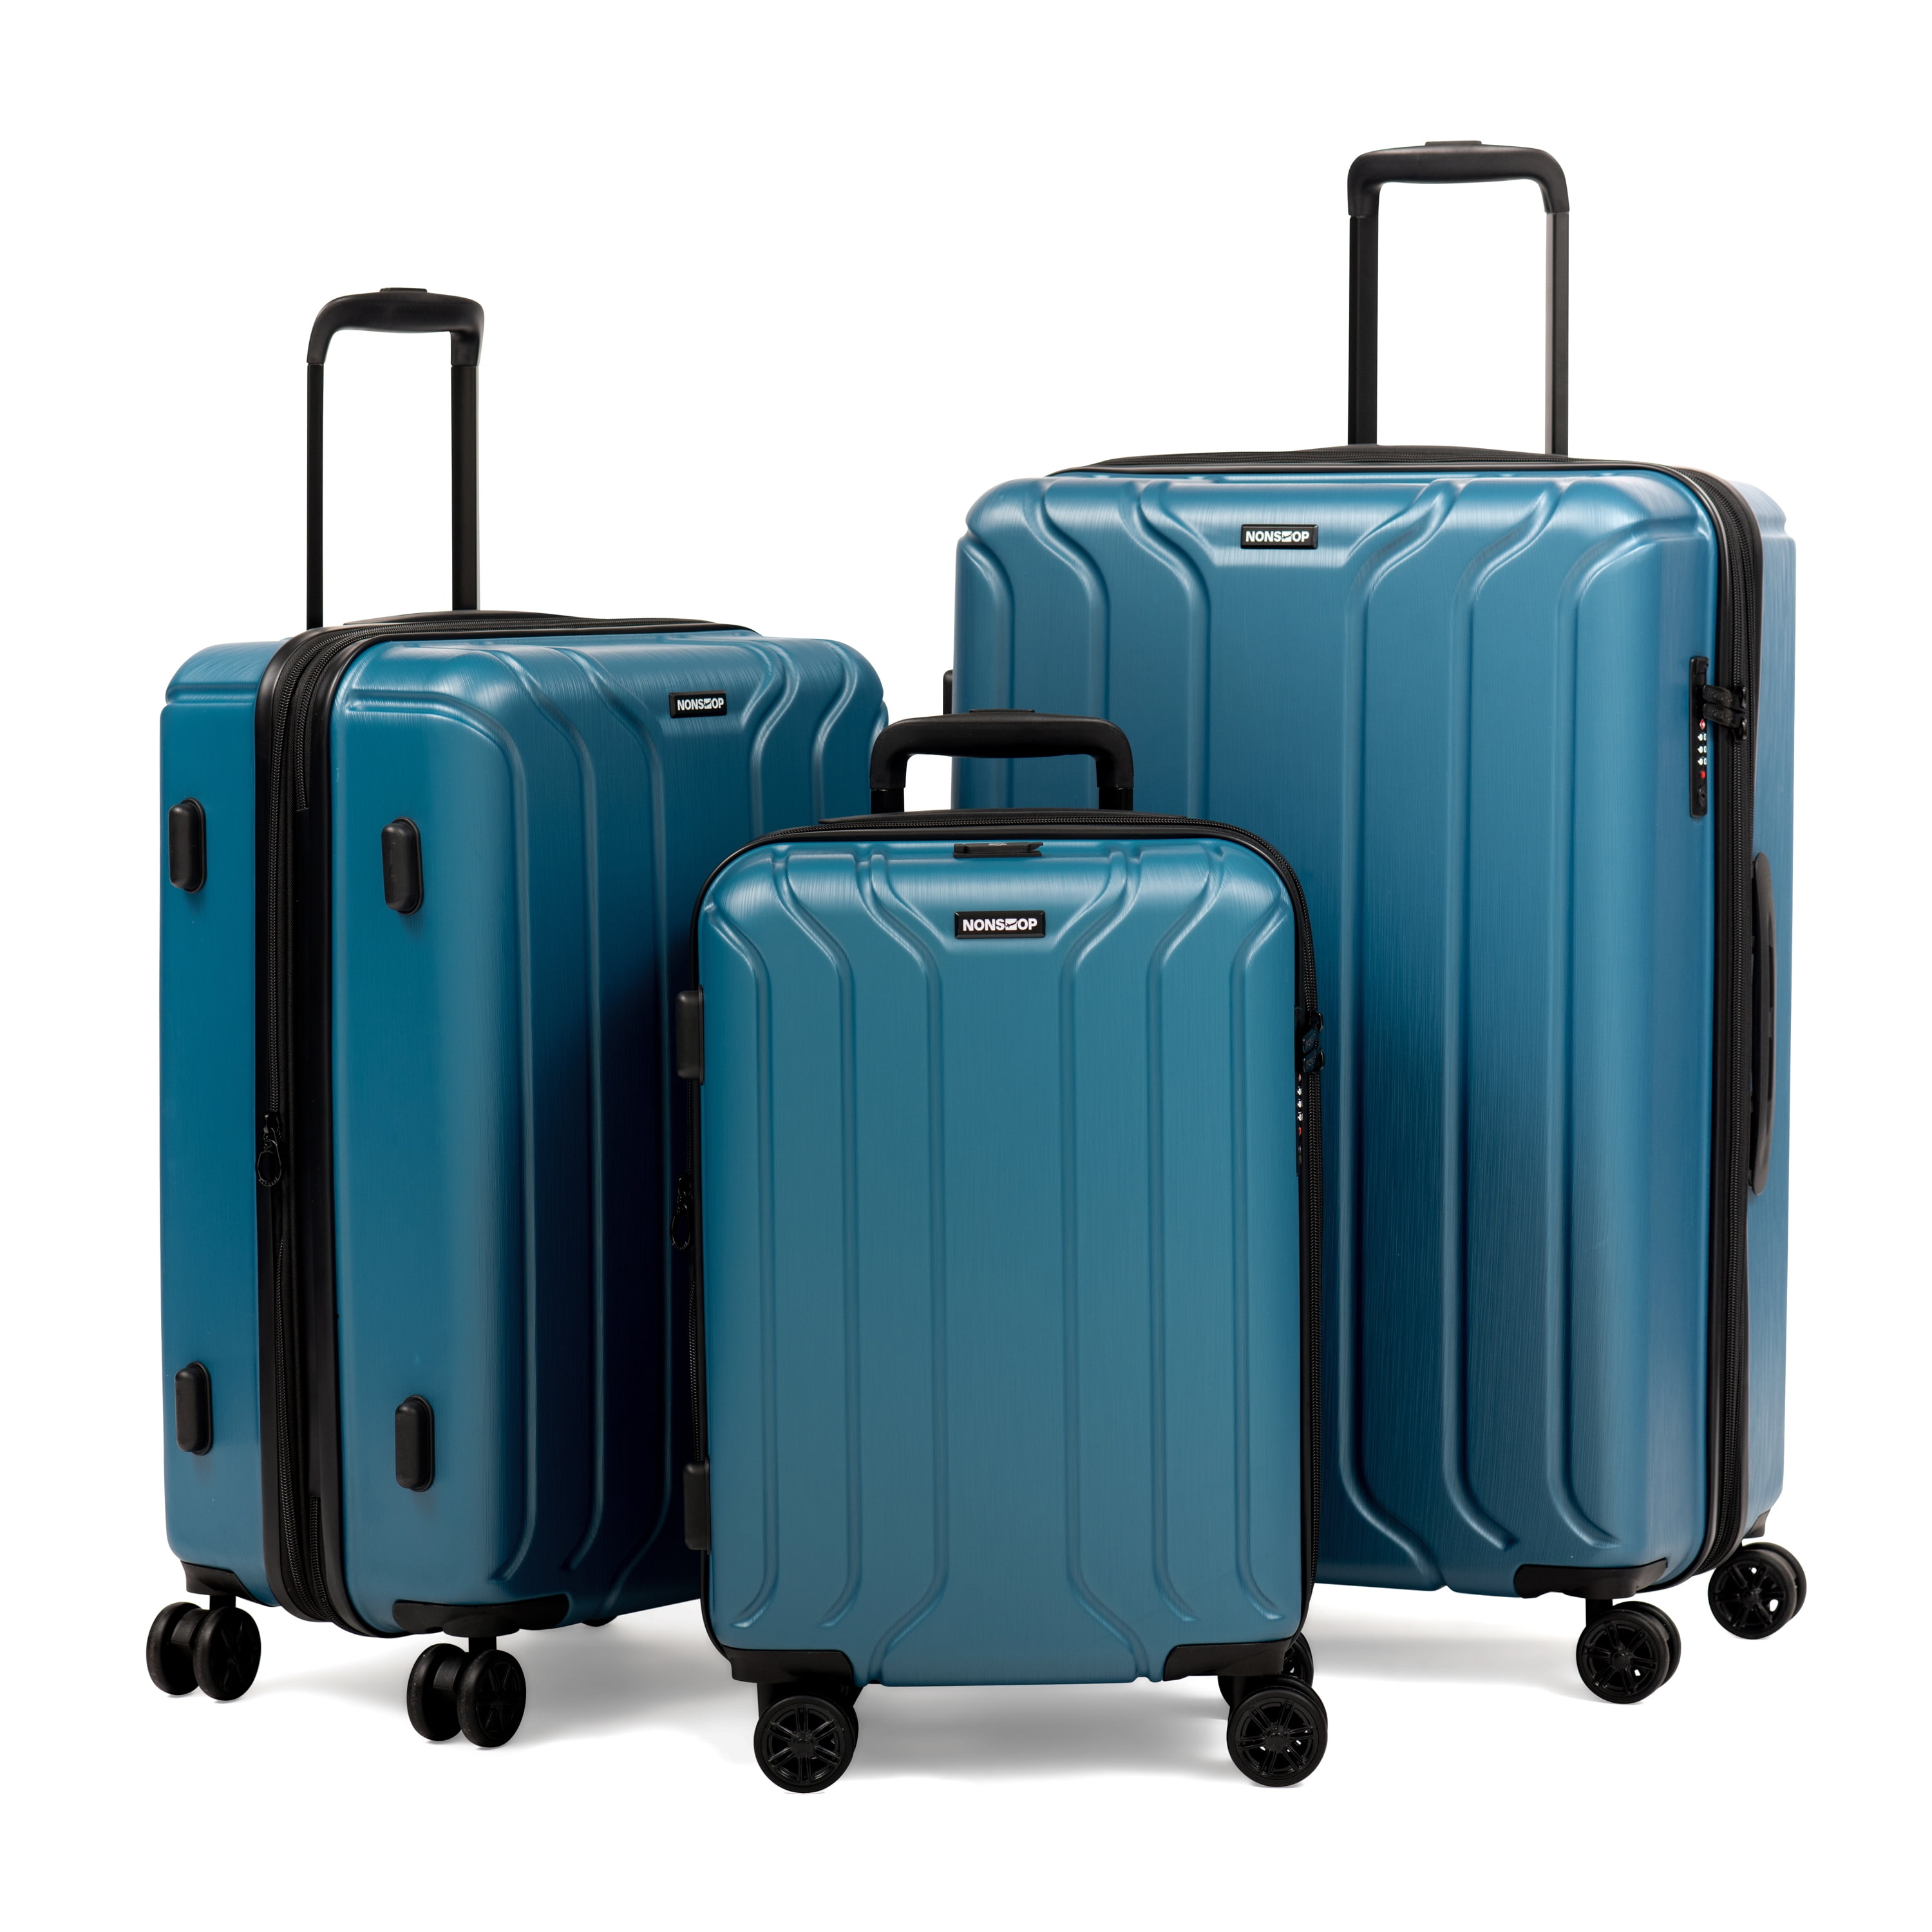 Samsonite Spin Tech 5.0 Hardside Luggage Collection, Created for Macy's -  Macy's